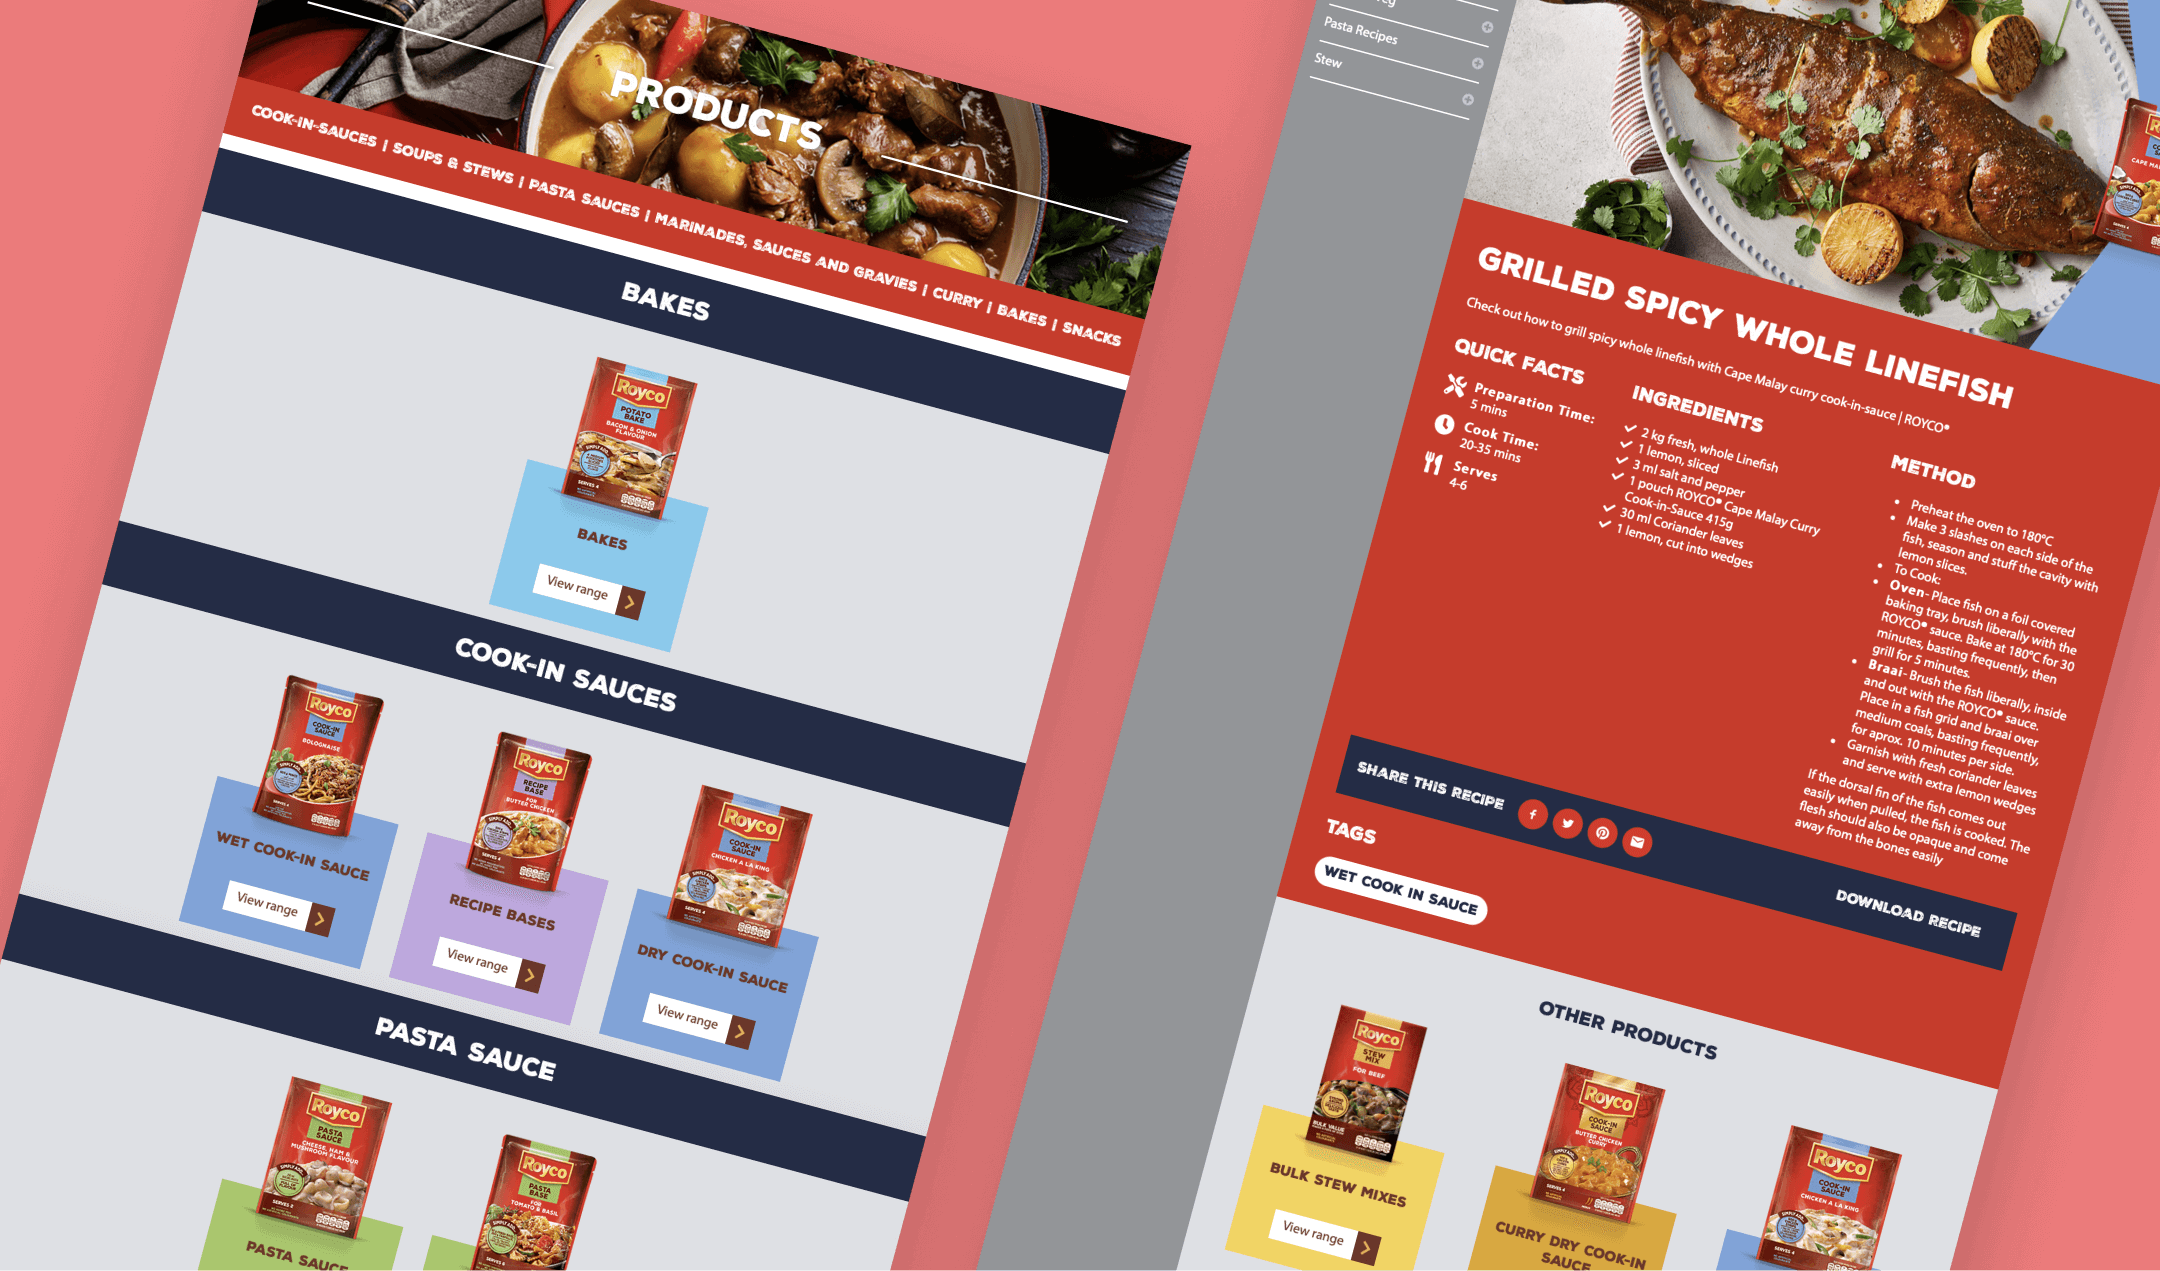 Migrated Royco product and recipe pages